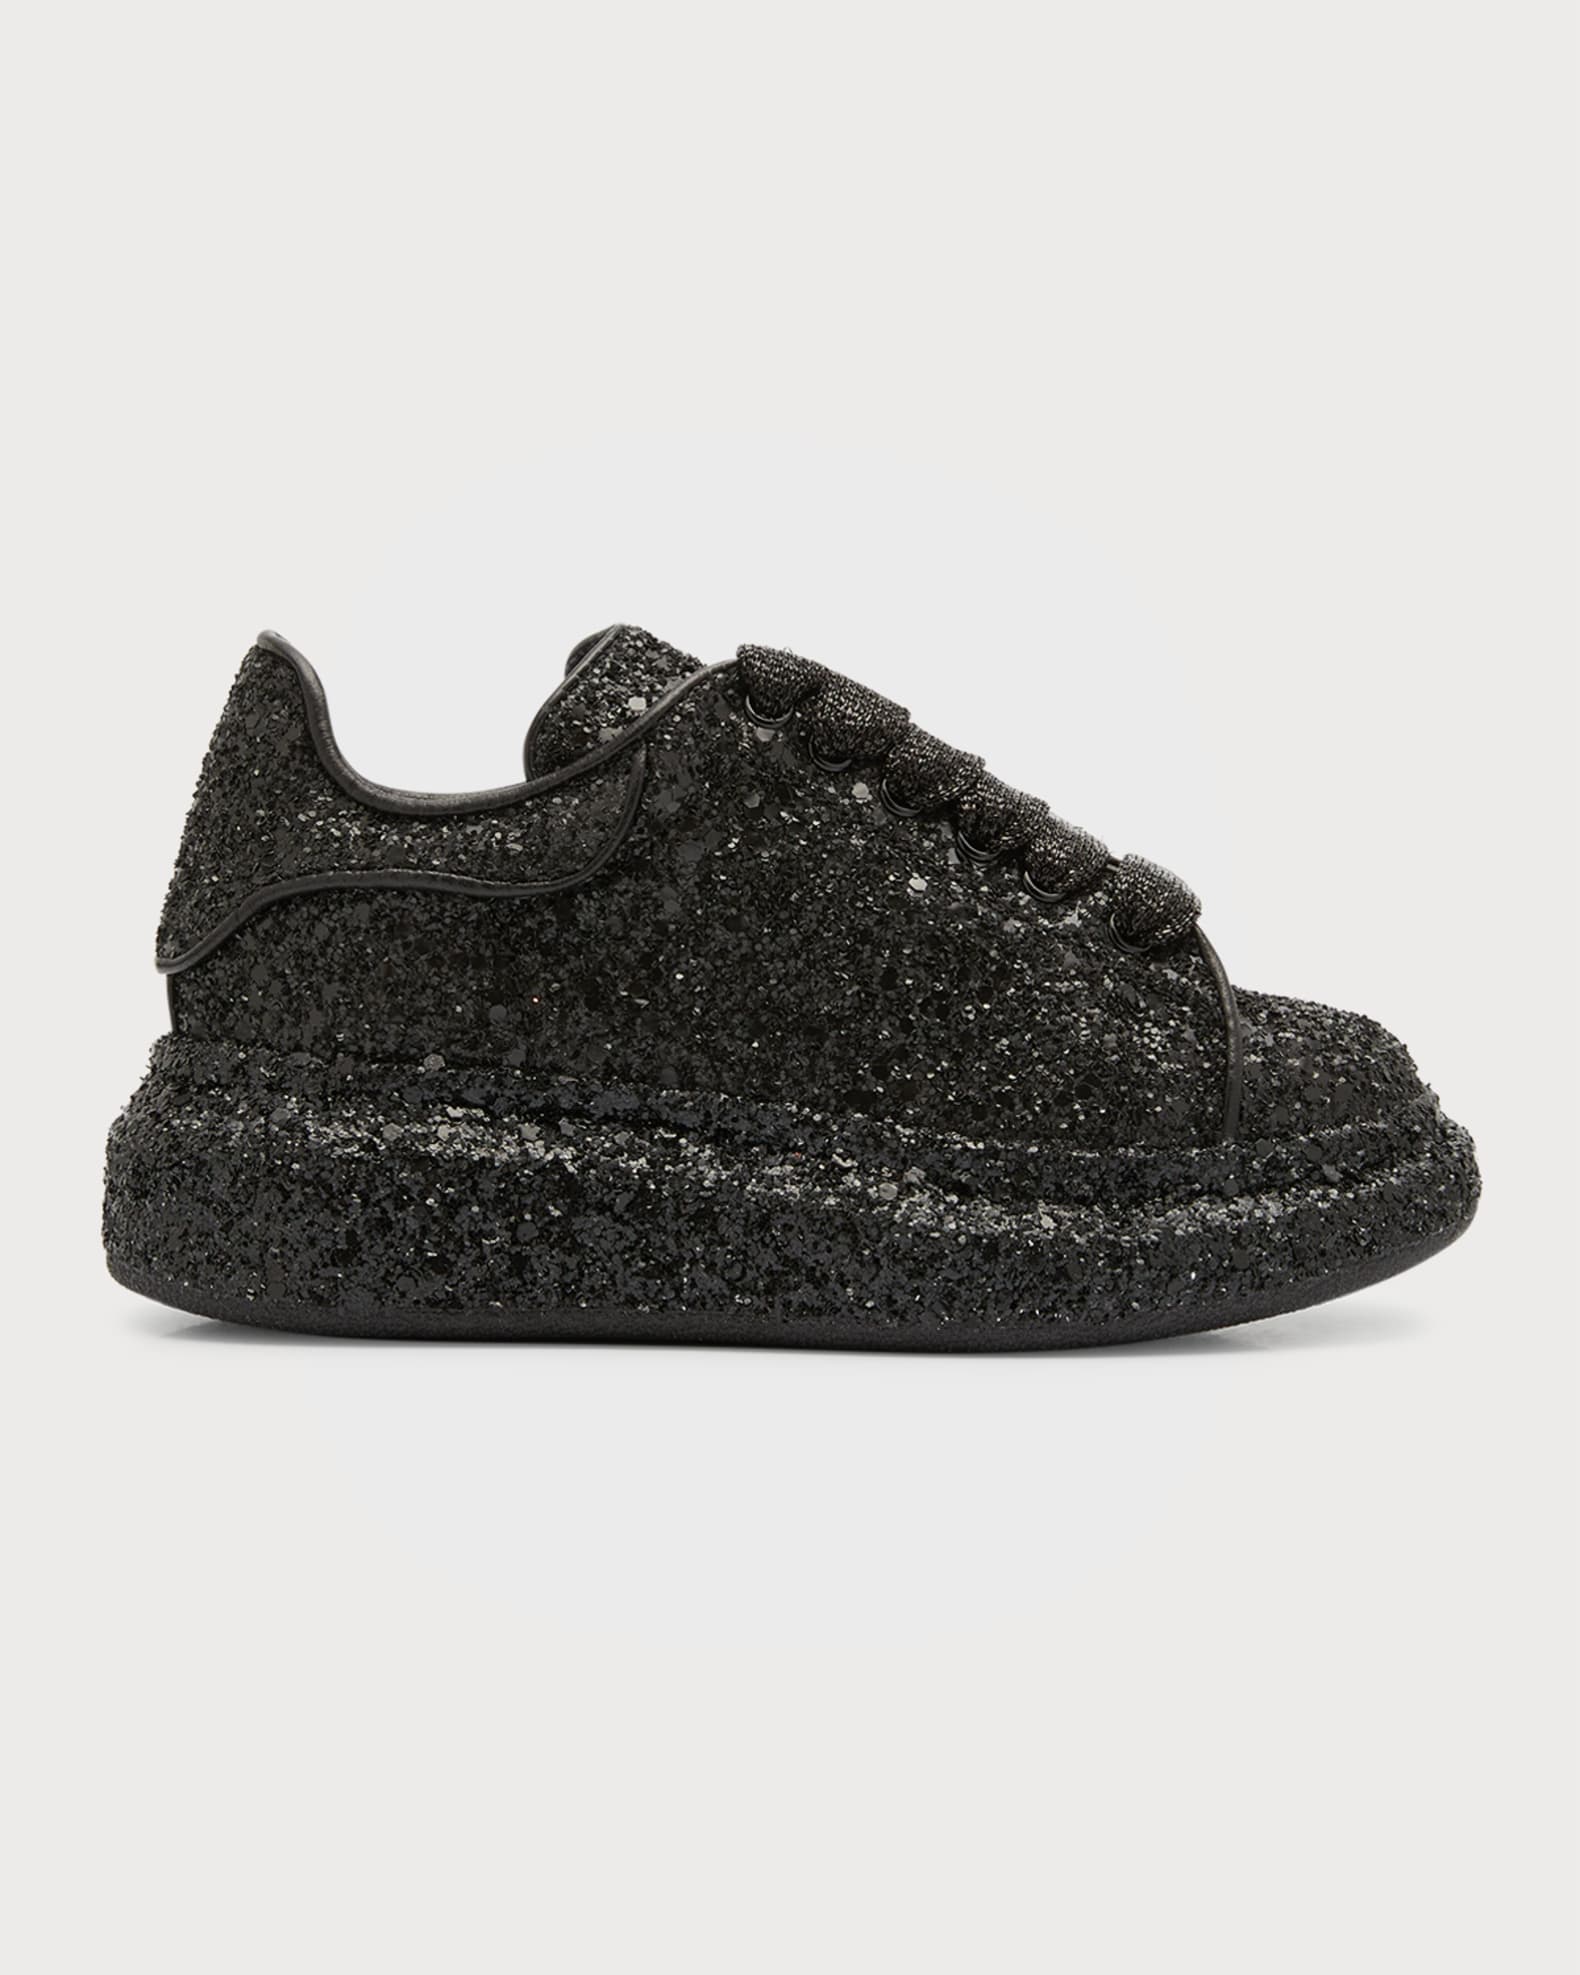 undefined | Kid's Oversized Glitter Sneakers, Toddlers/Kids